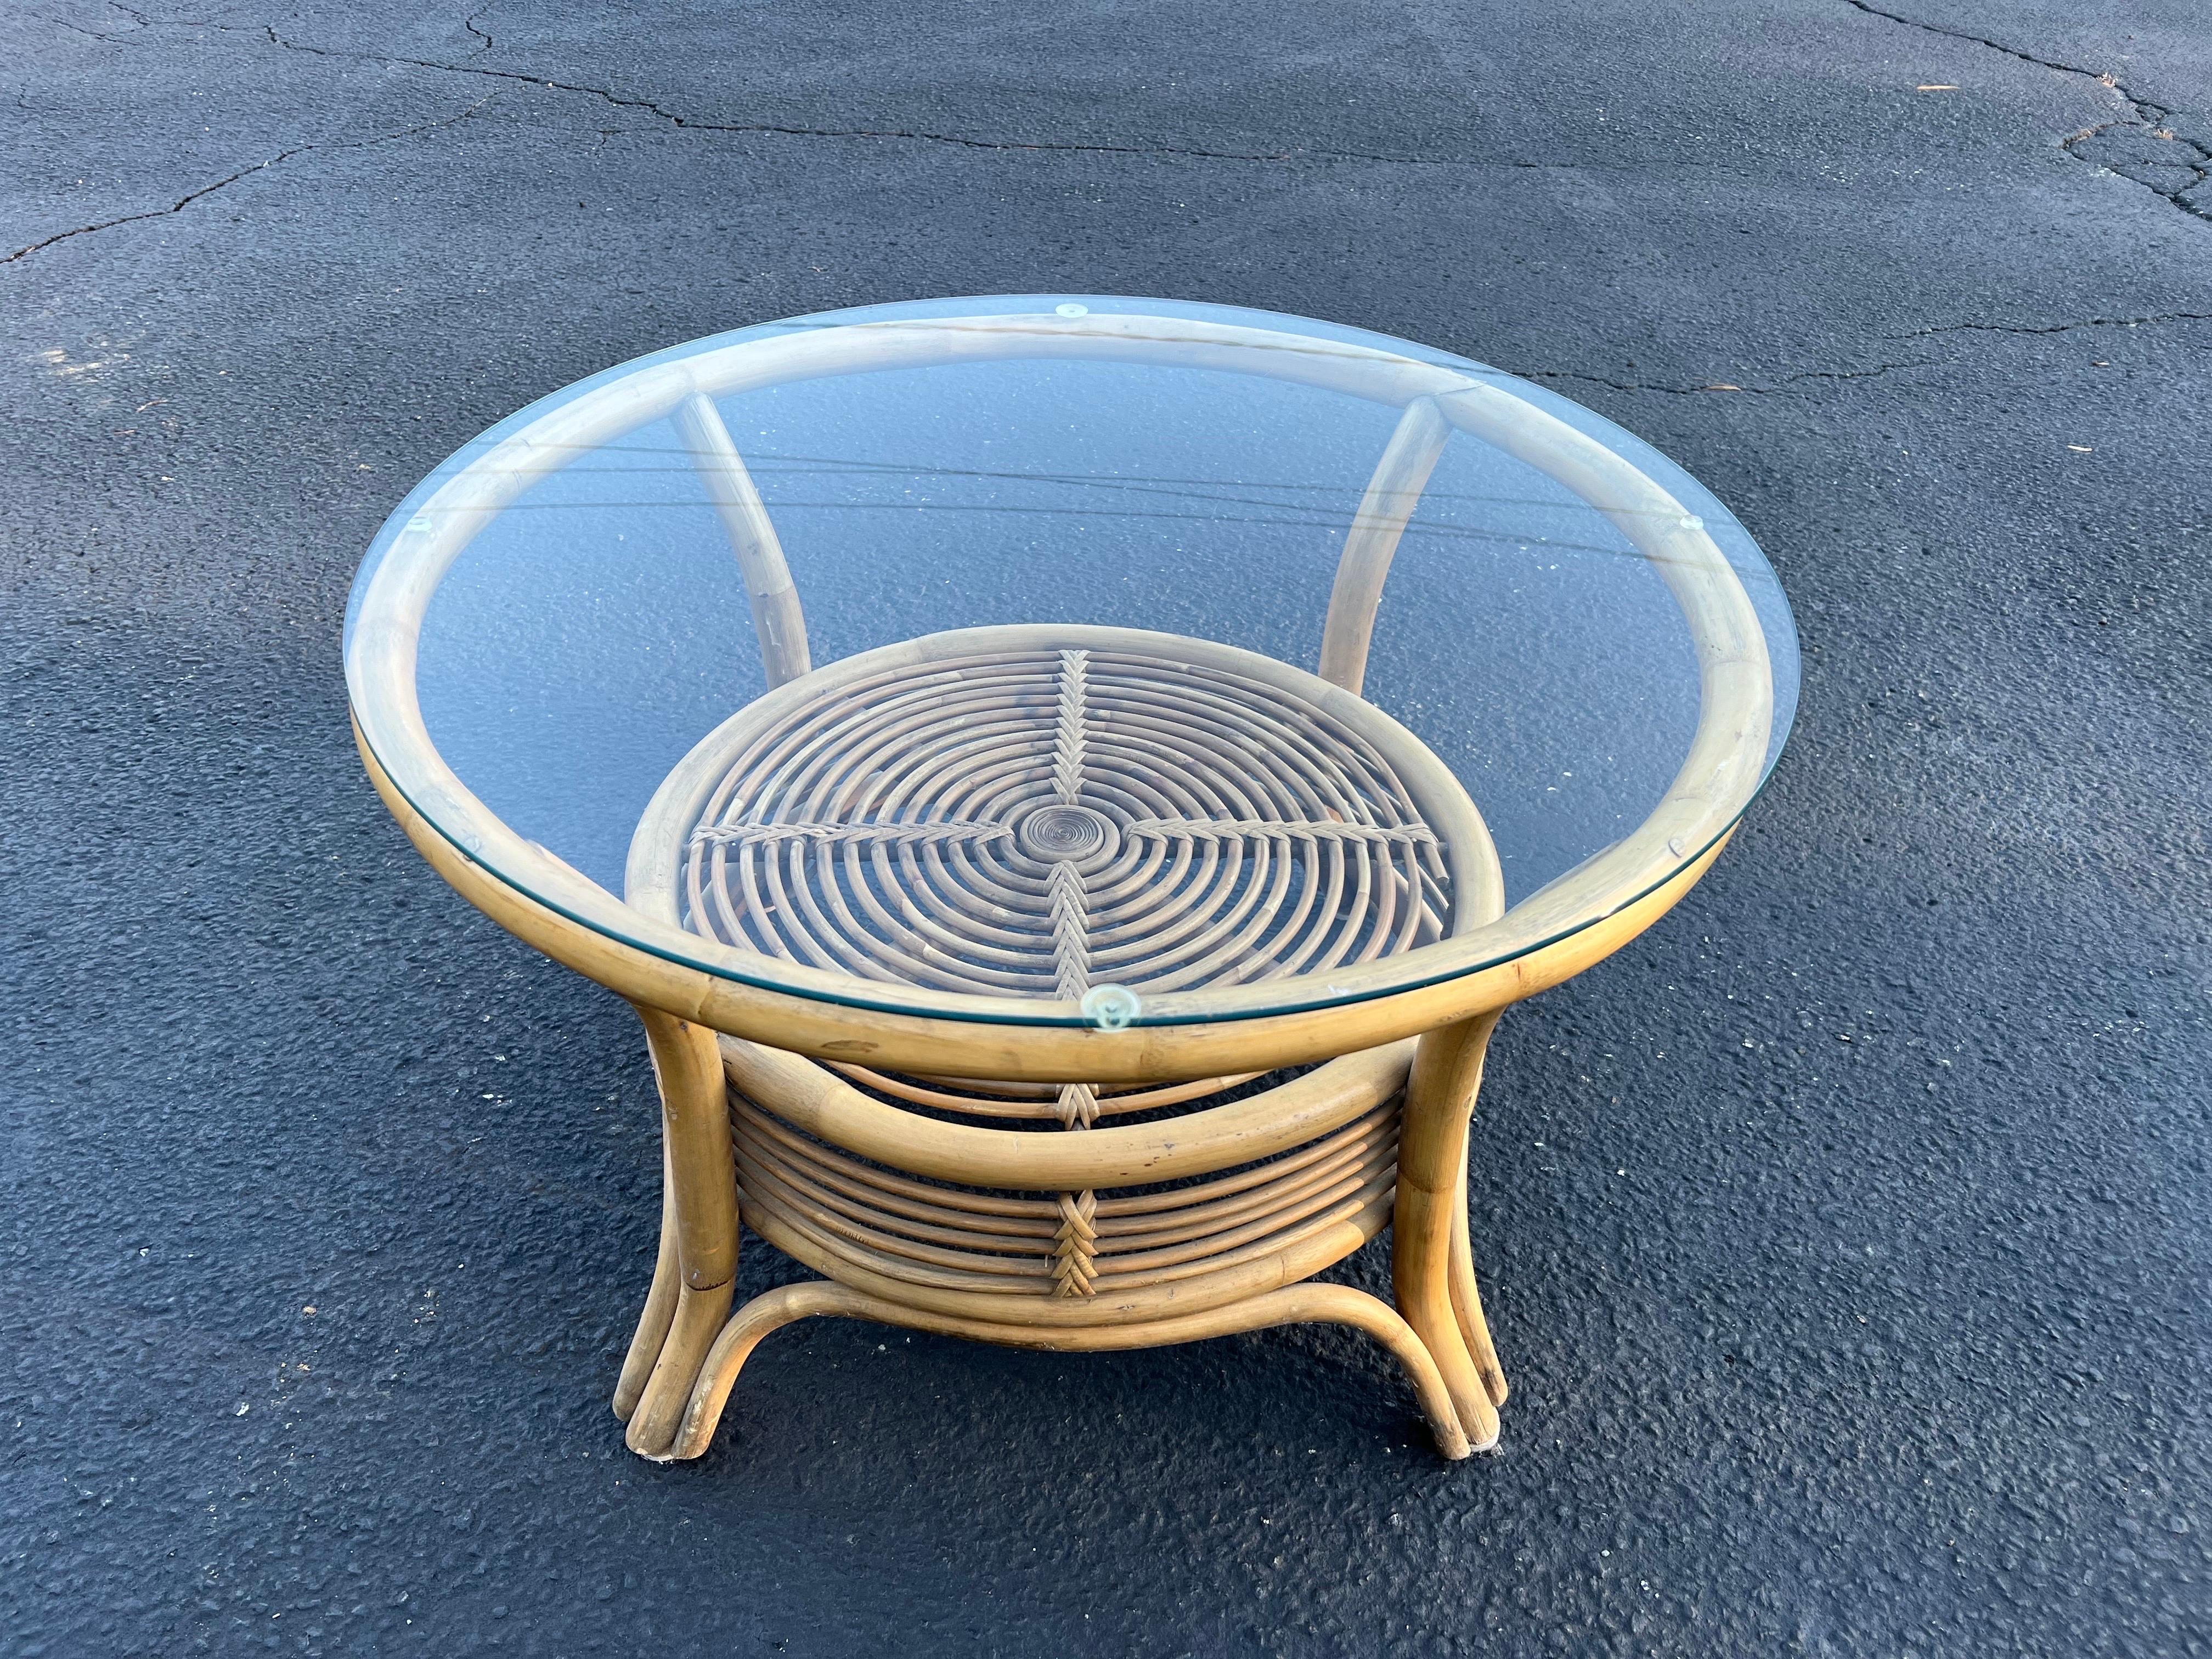 Italian style rattan and bamboo coffee table with glass top. Nice round two tiered table use as a side table or as a smaller coffee table. Swirling weaved design. Nice for that coastal beach home vibe.